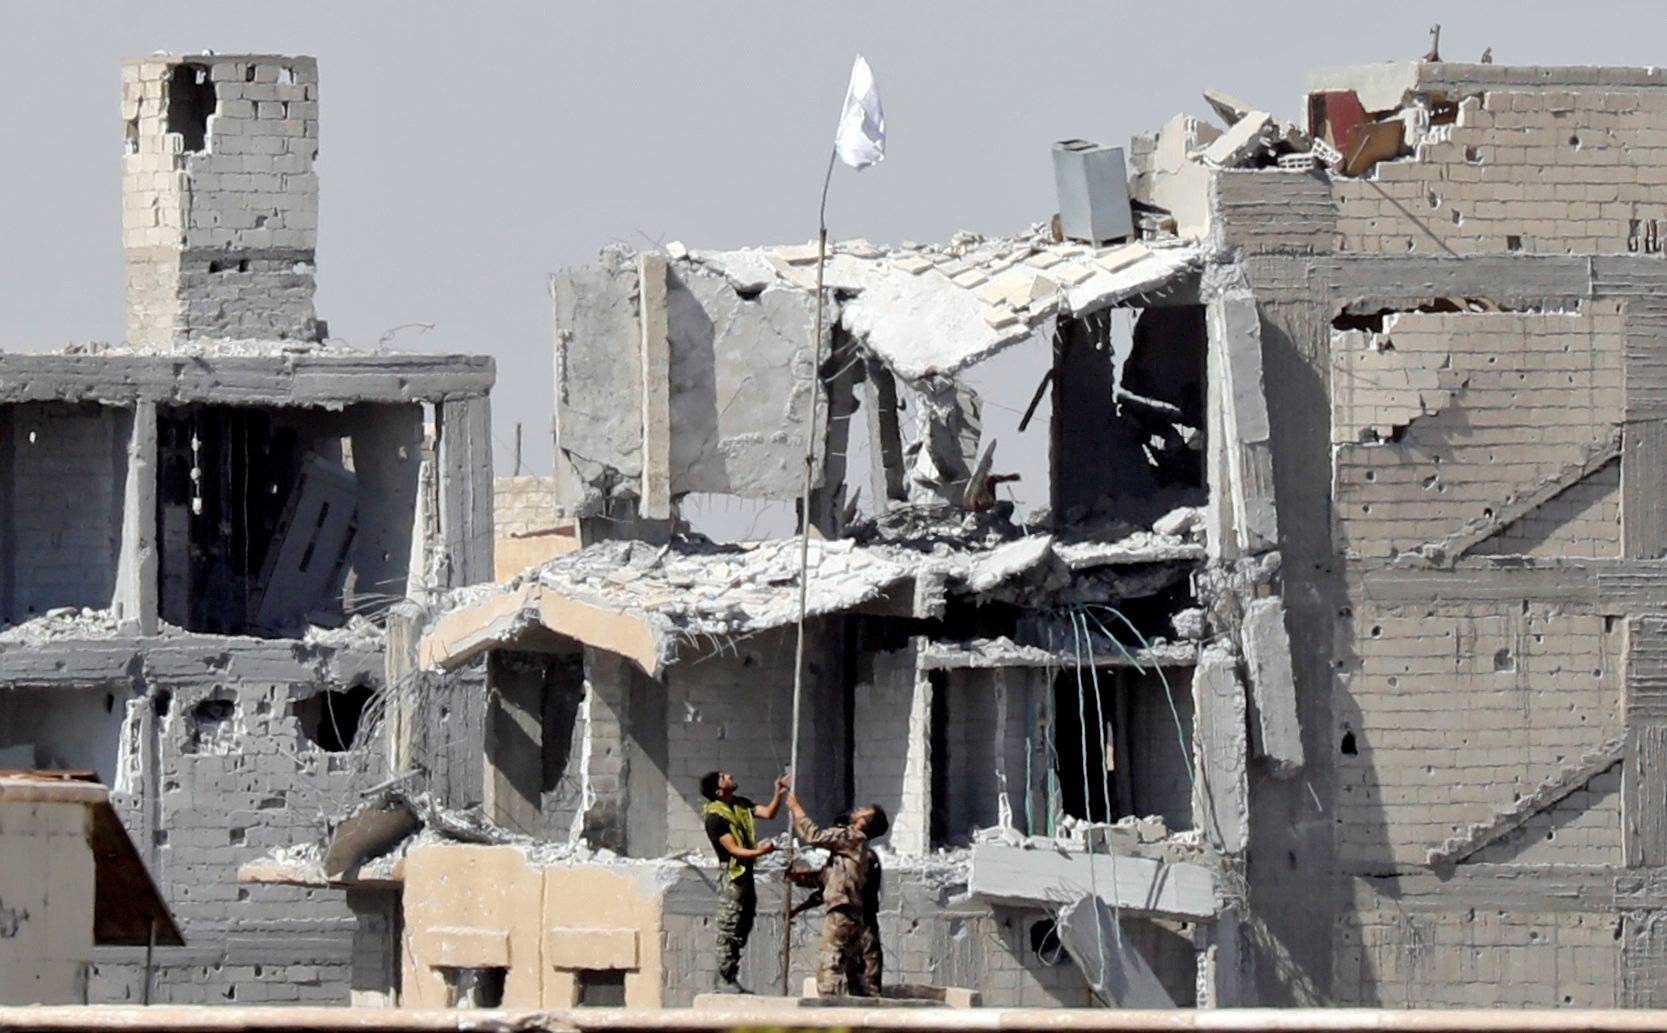 Fighters of Syrian Democratic Forces raise a white flag near the National Hospital complex where the Islamic State militants are holed up, at the frontline in Raqqa